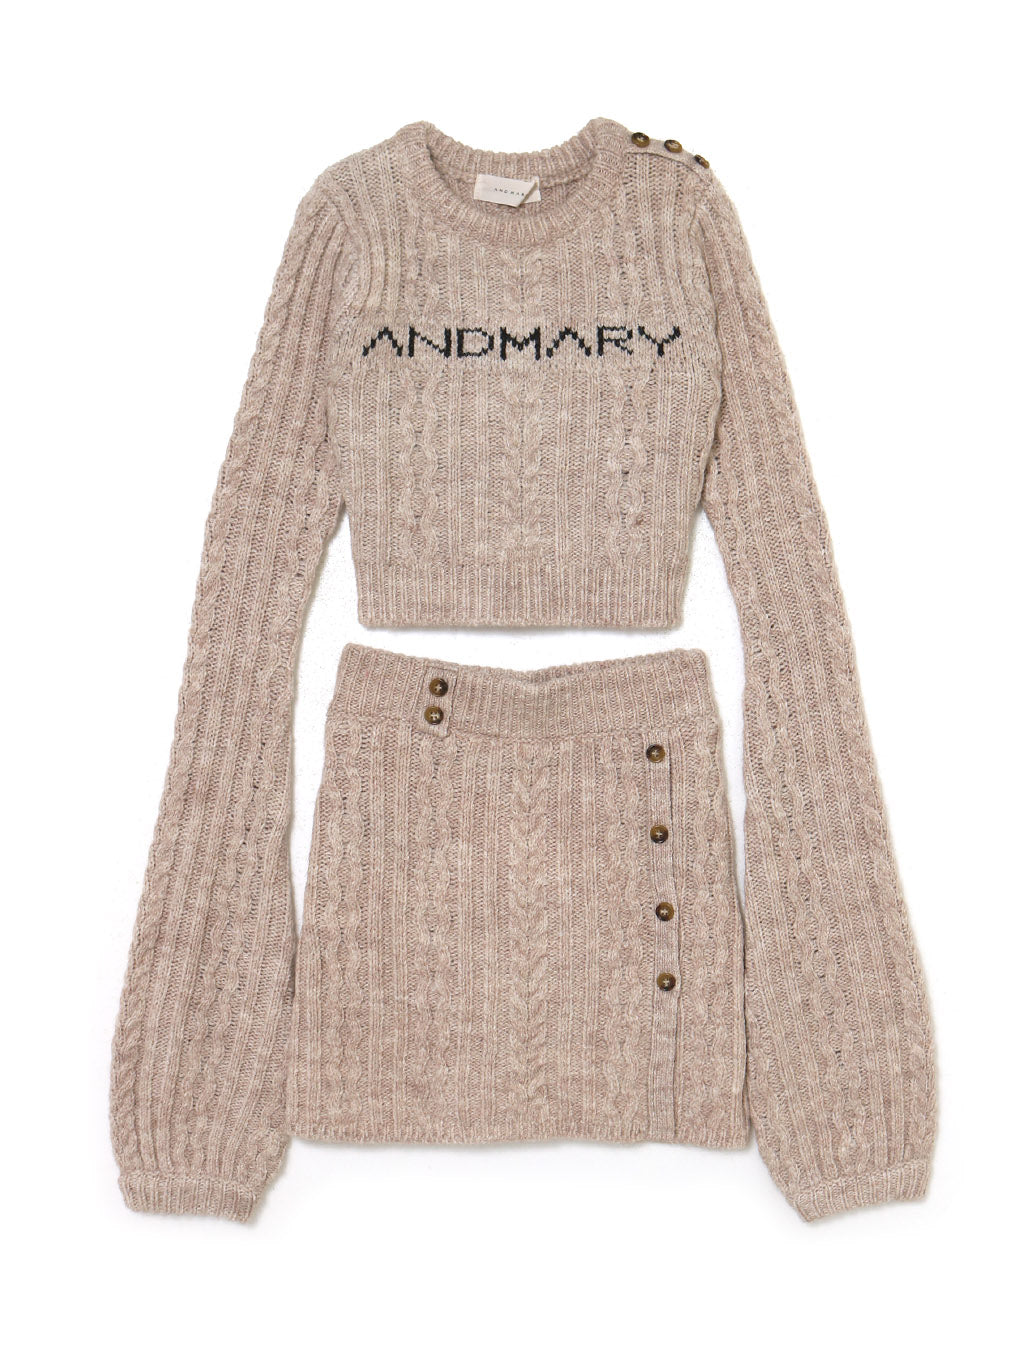 Marie knit set up andmaryアンドマリー